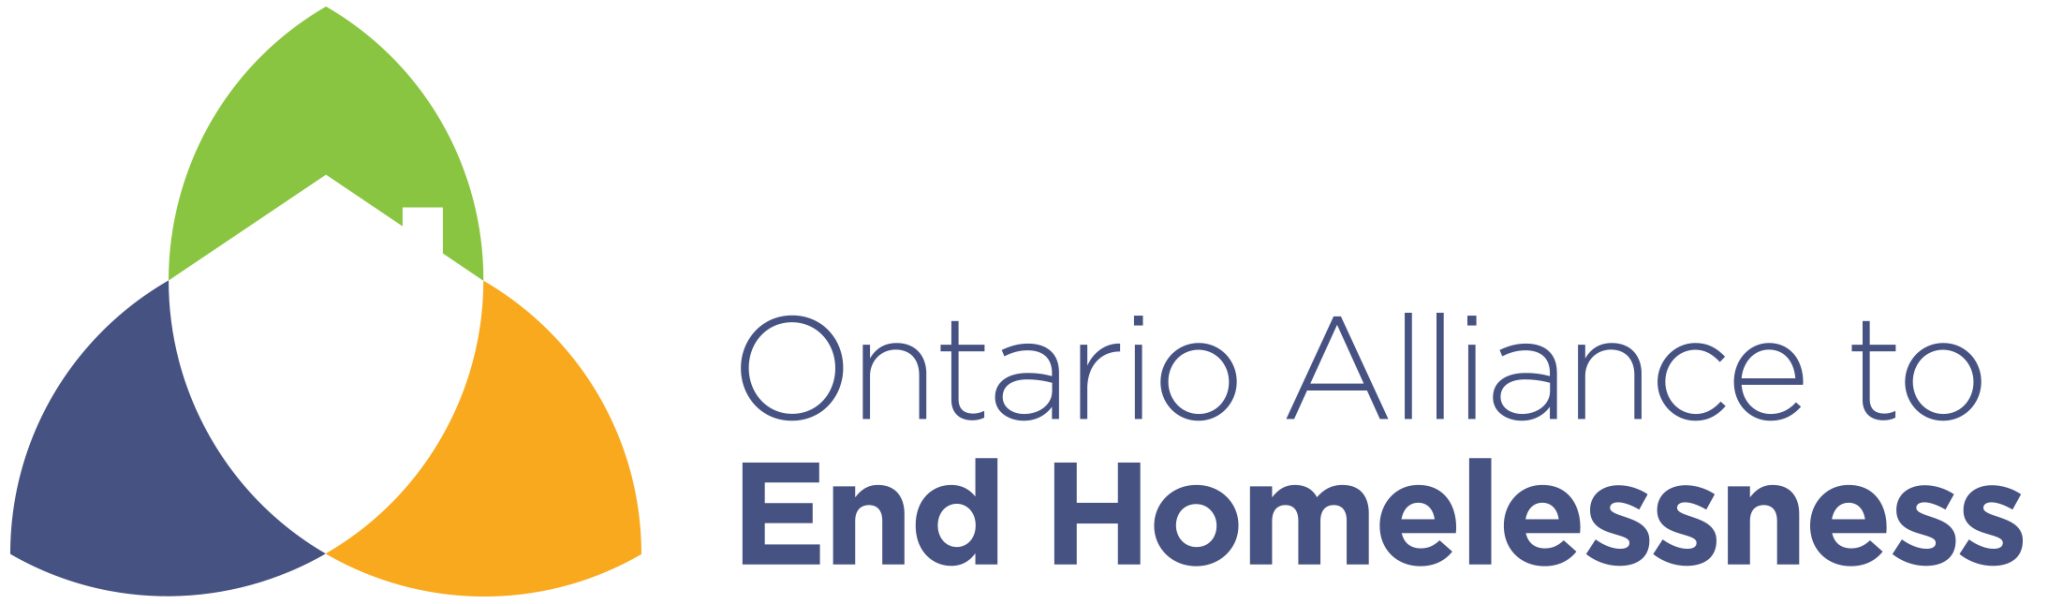 Ontario Alliance to End Homelessness